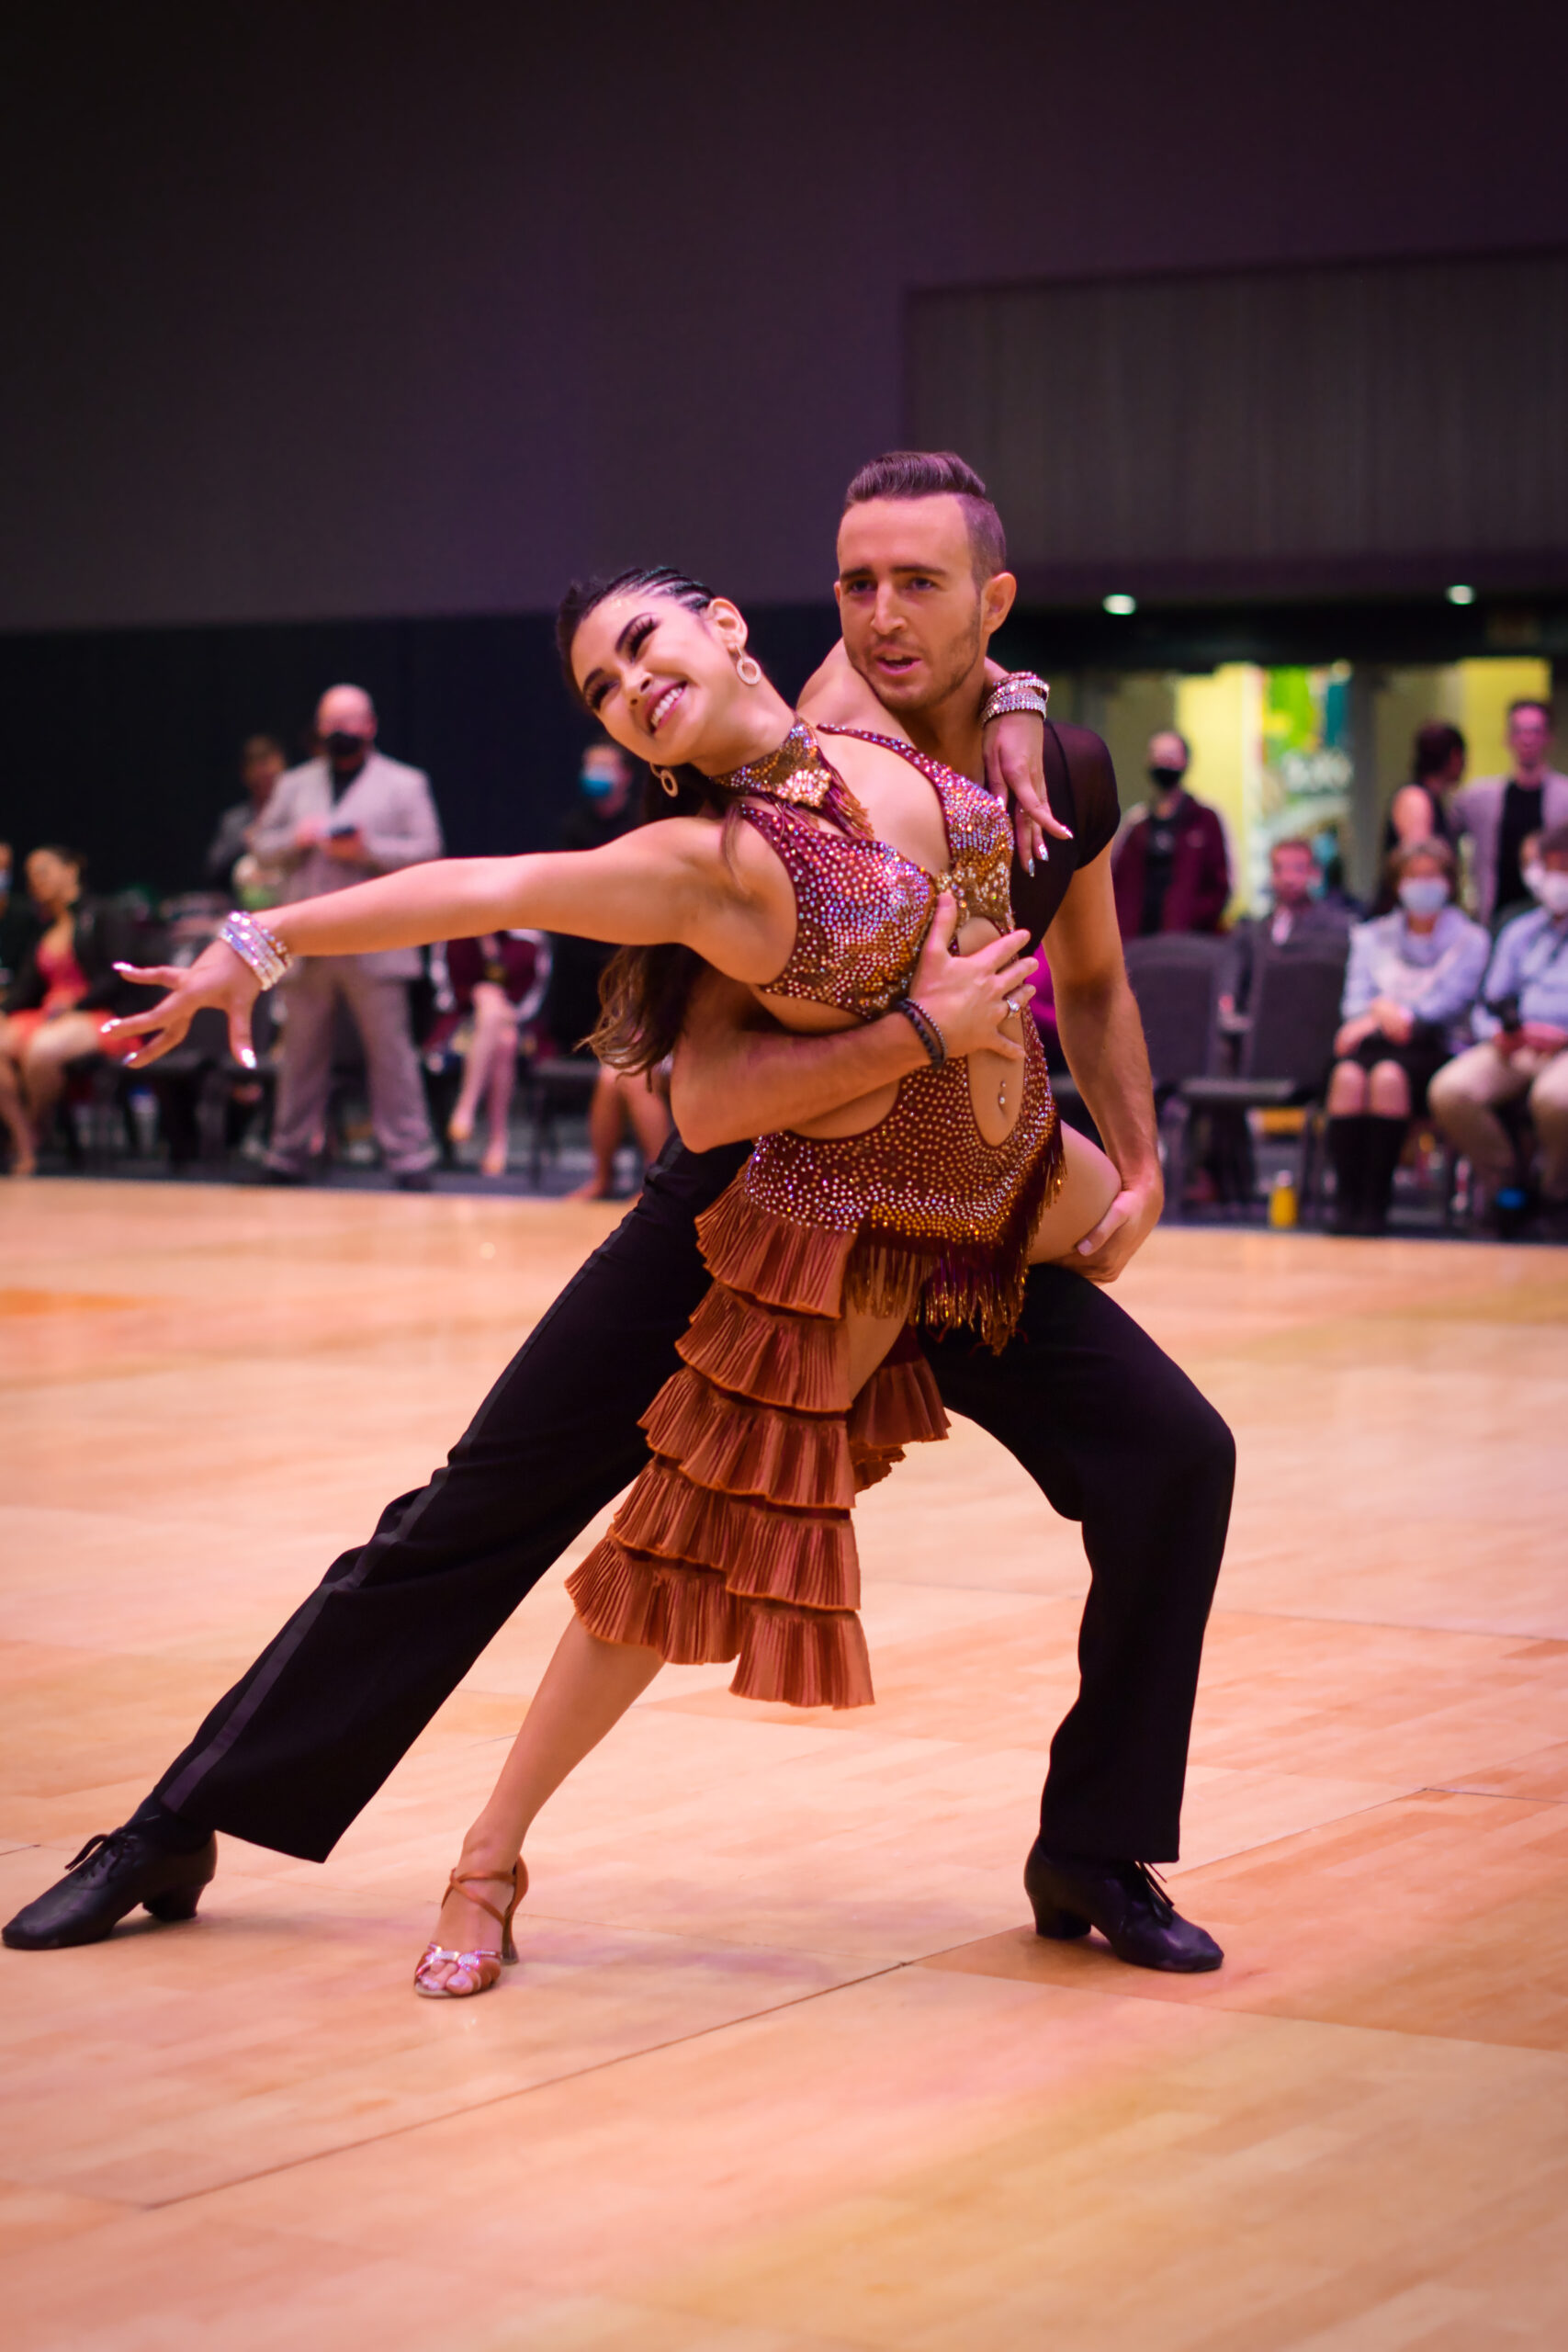 Stephen Sekoulopoulos and Sabrina Sharmeen are the 2022 Amateur Adult Rhythm Champions and Amateur Adult Latin Bronze Medalists. Photo by Guy Platt.